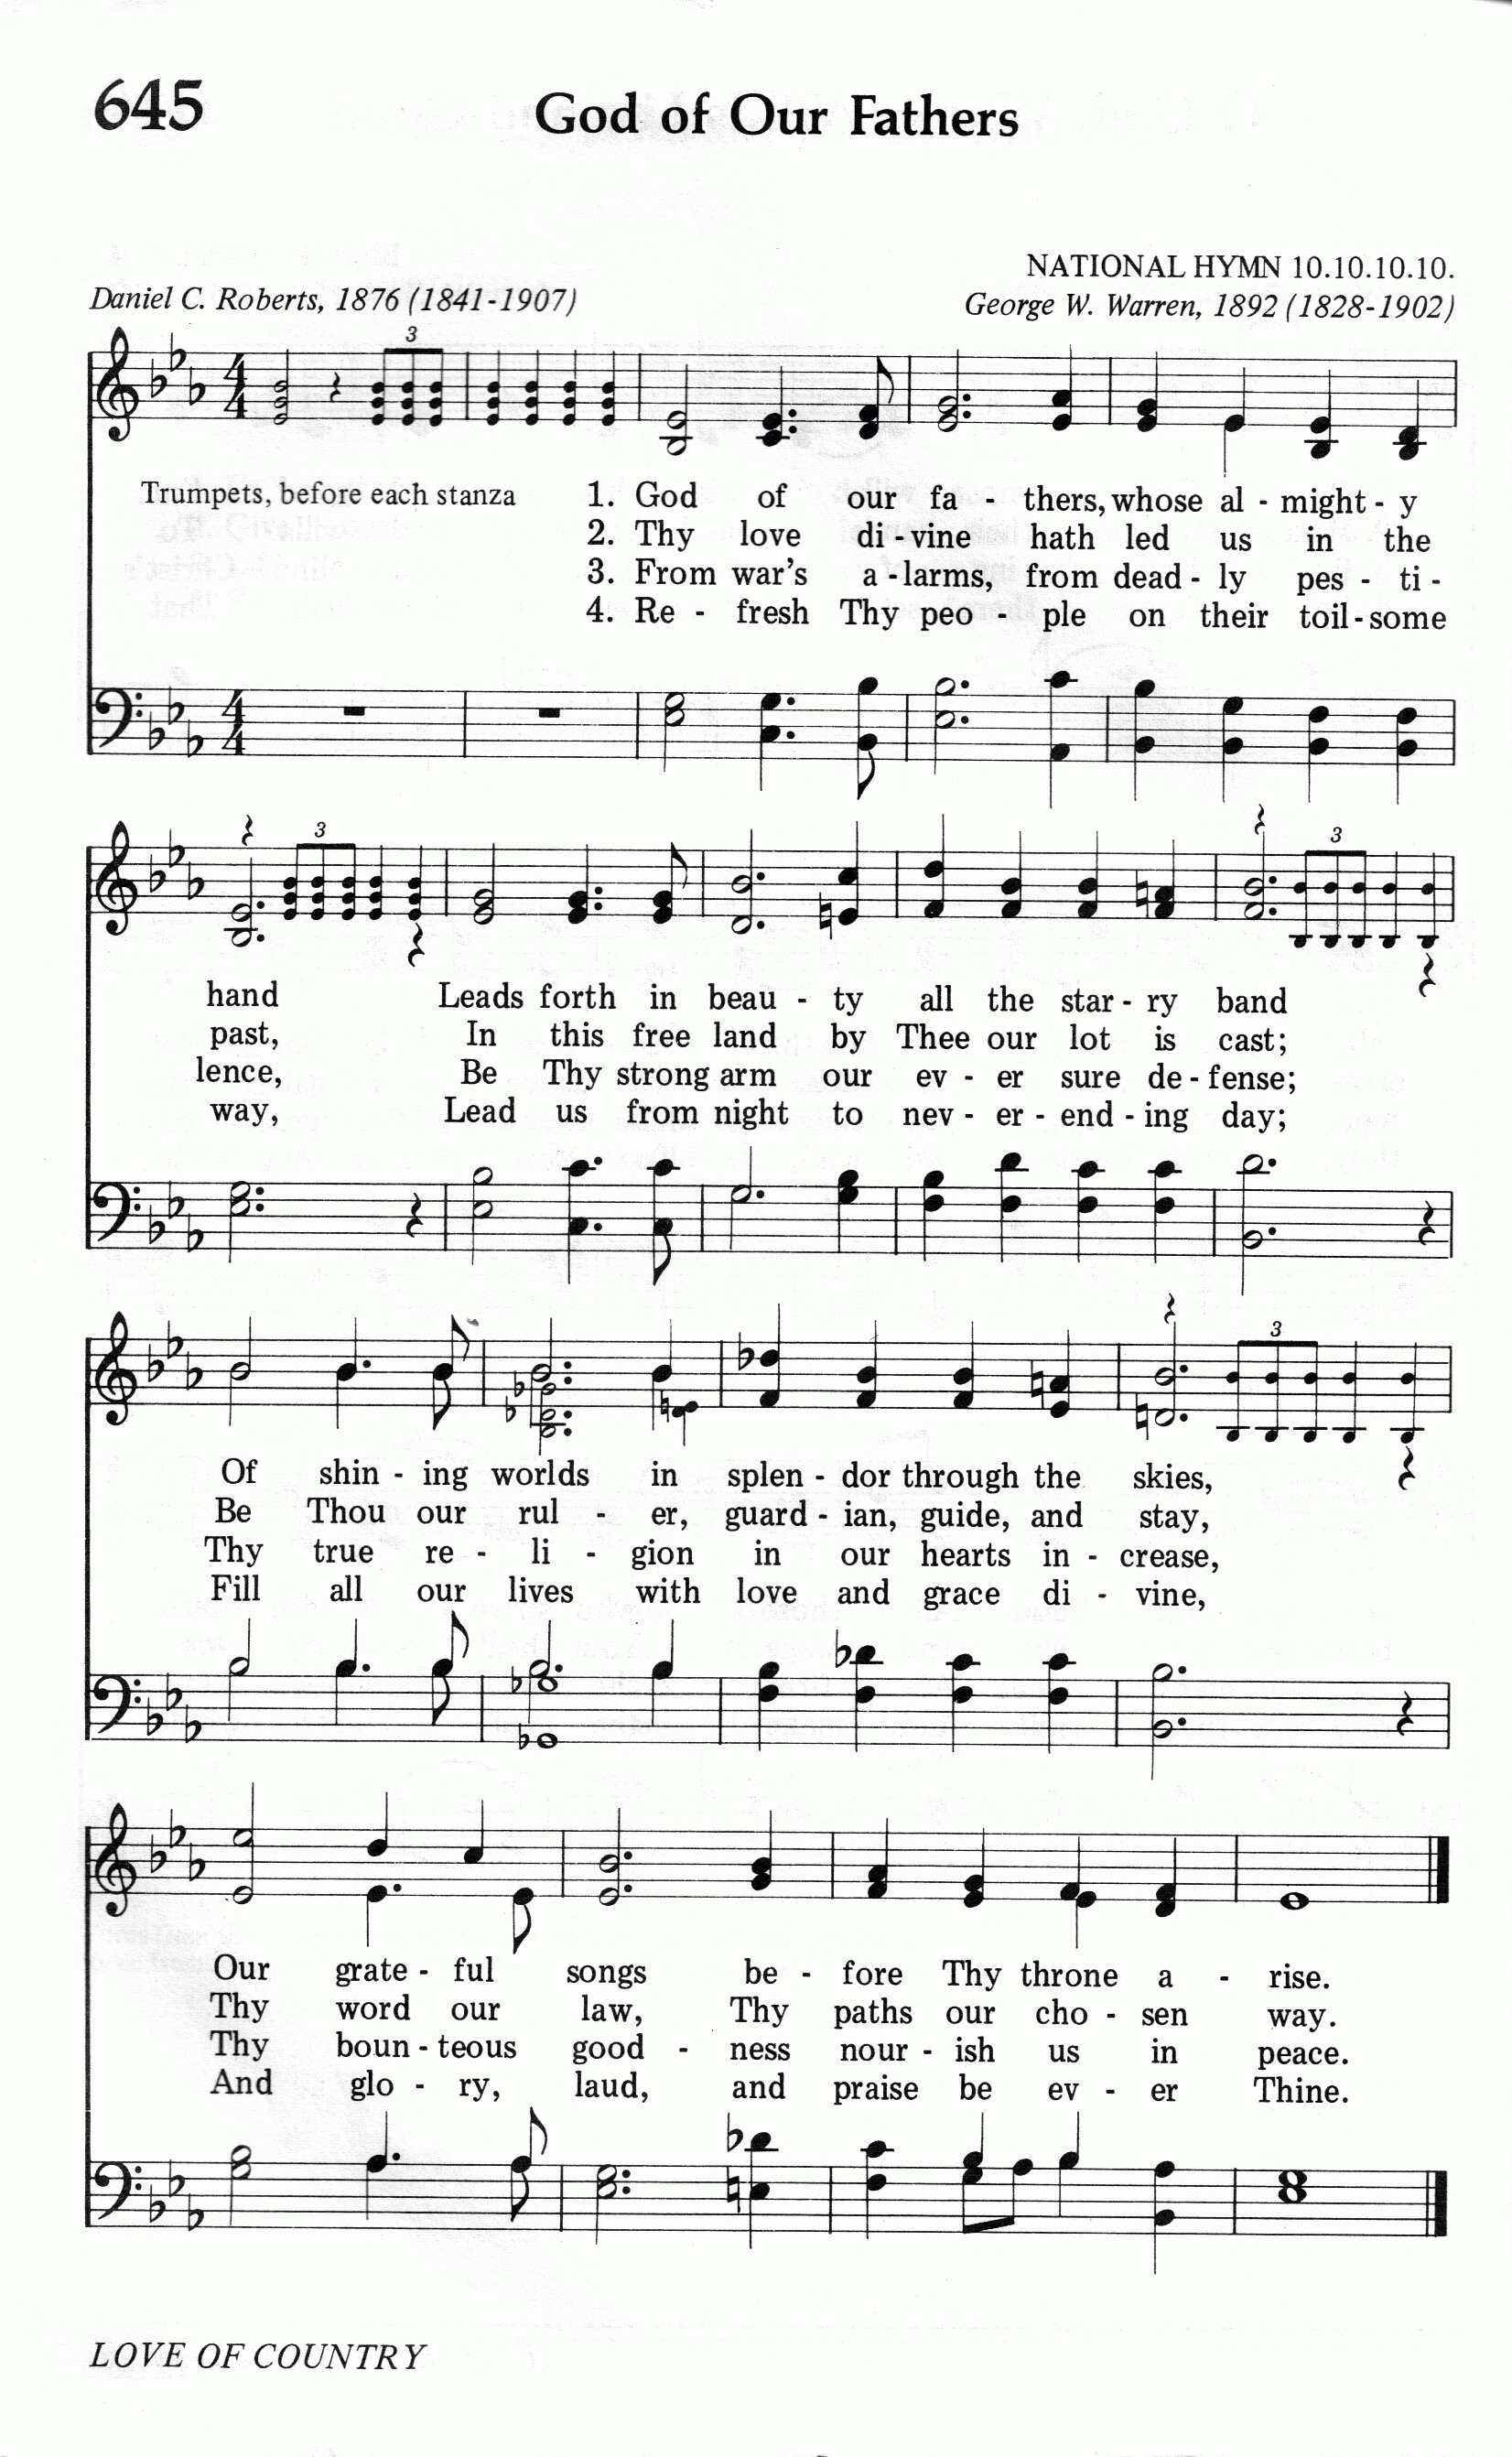 645.God of our fathers-695HYMN